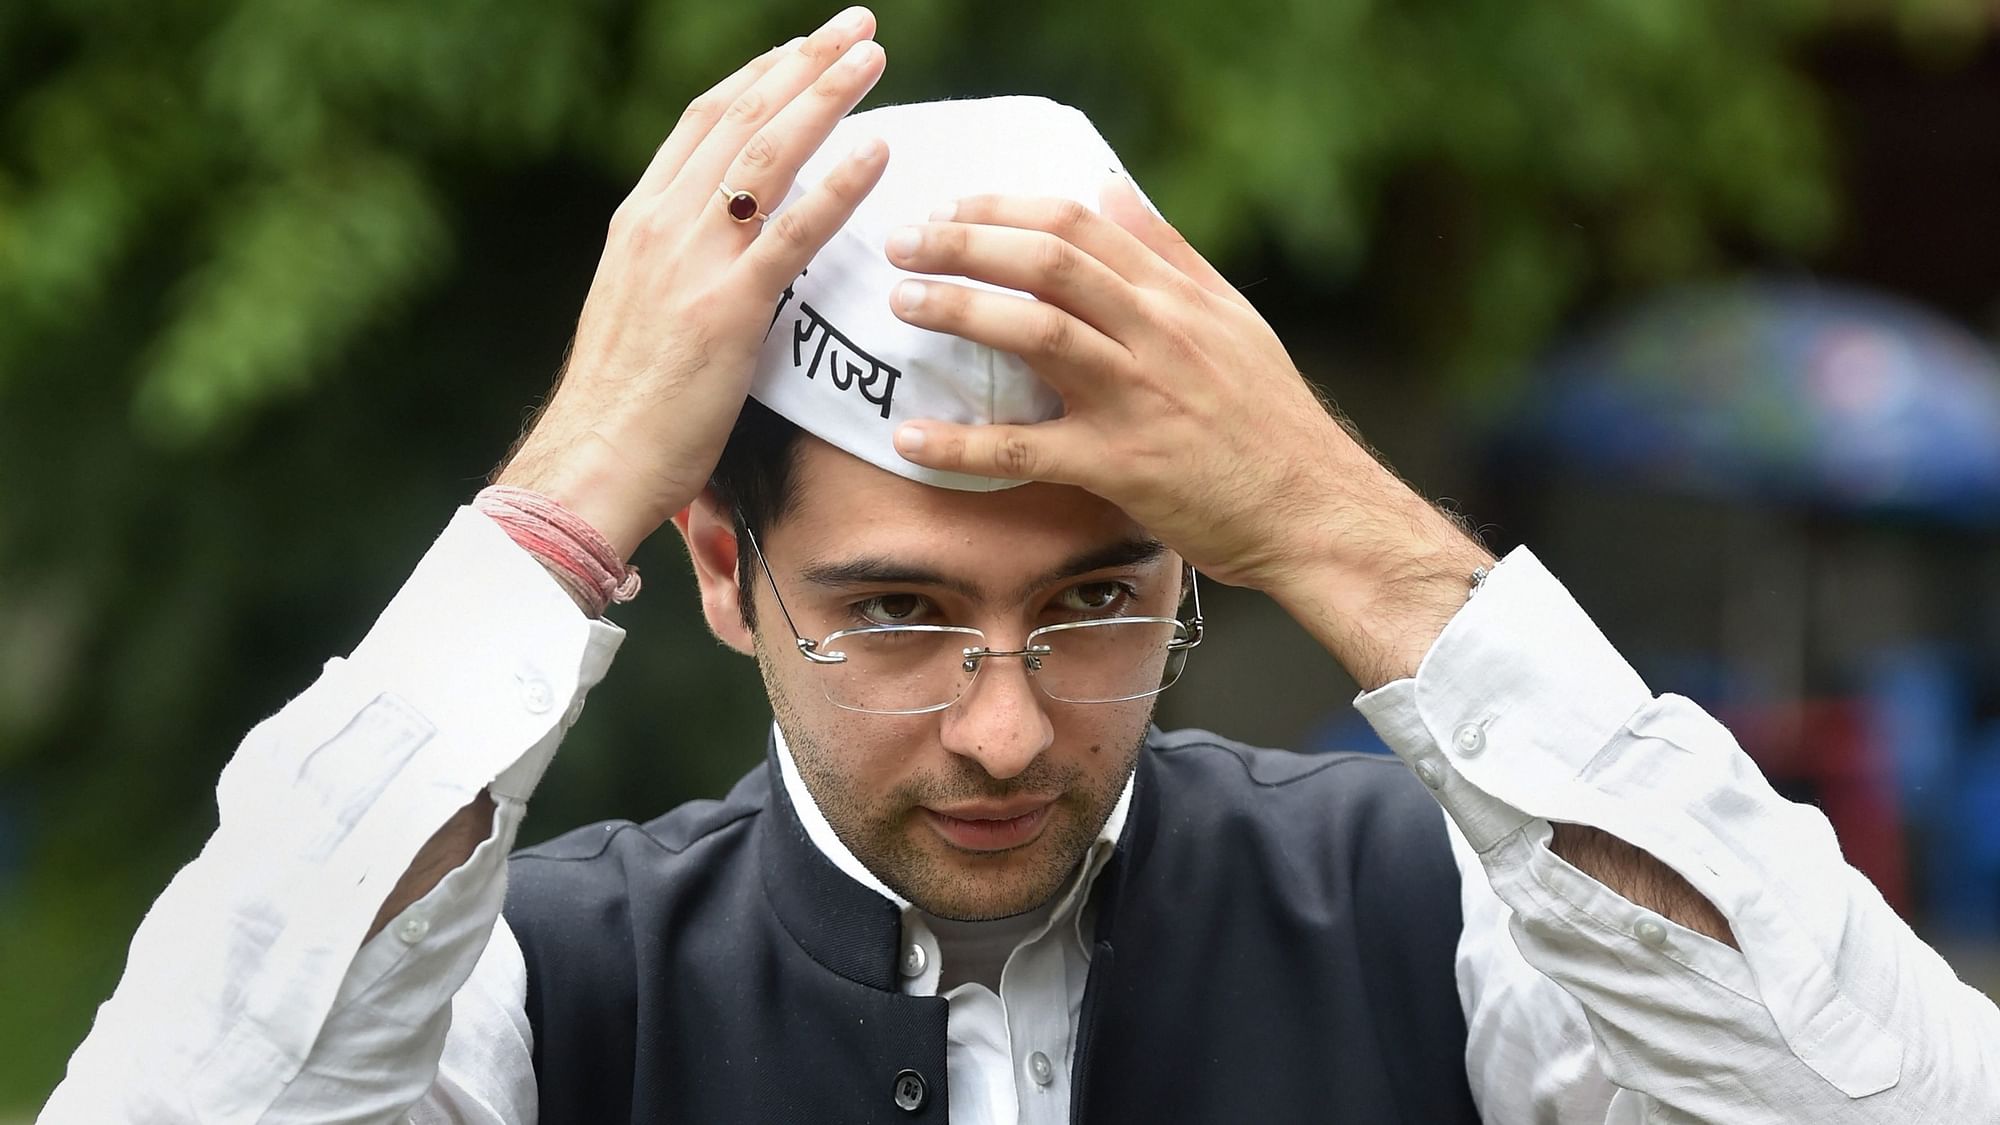 Aam Aadmi Party Spokesperson and Executive Member Raghav Chadha, through a petition, has challenged his defeat in the national election.